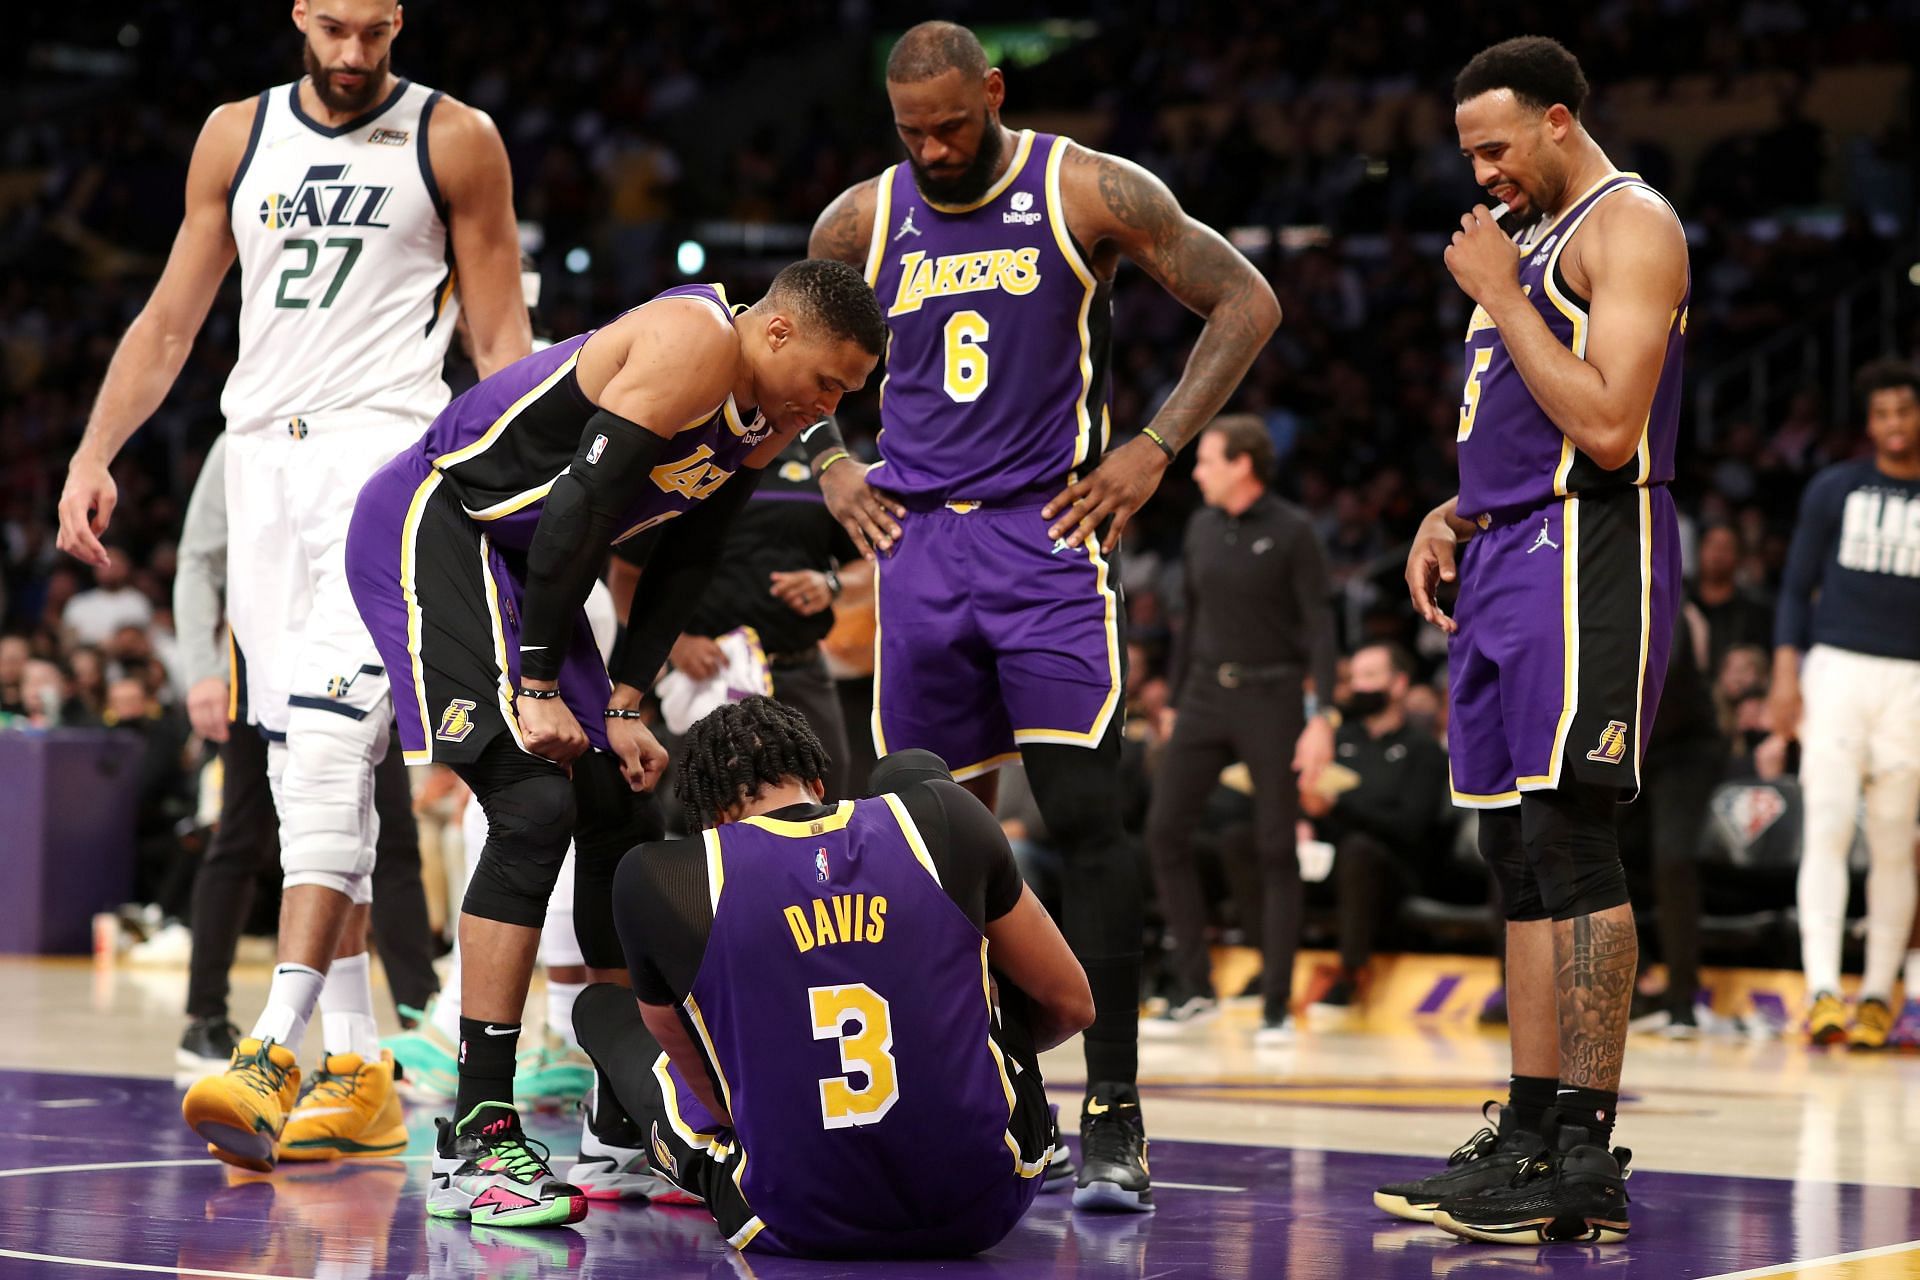 Russell Westbrook #0, LeBron James #6 and Talen Horton-Tucker #5 of the Los Angeles Lakers check up on teammate Anthony Davis #3 after an injury during the second quarter against the Utah Jazz at Crypto.com Arena on February 16, 2022 in Los Angeles, California.